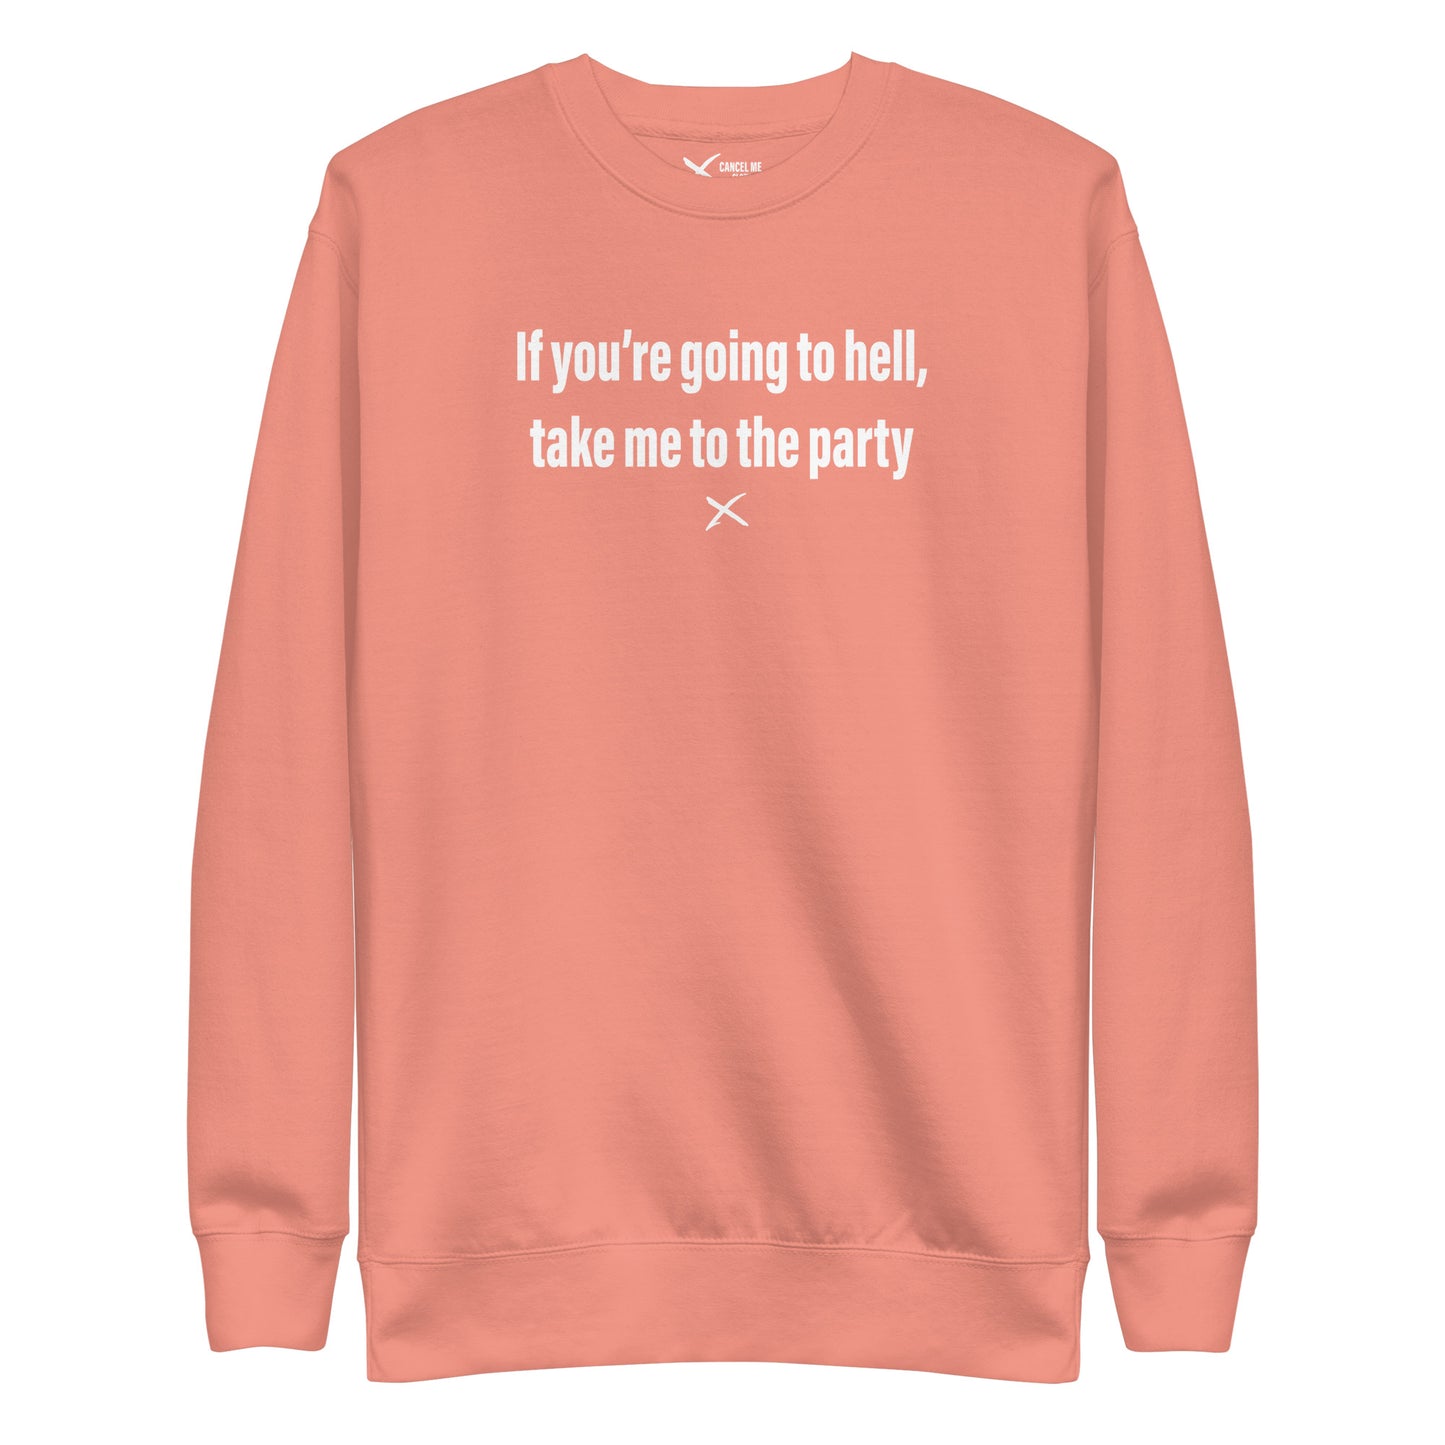 If you're going to hell, take me to the party - Sweatshirt